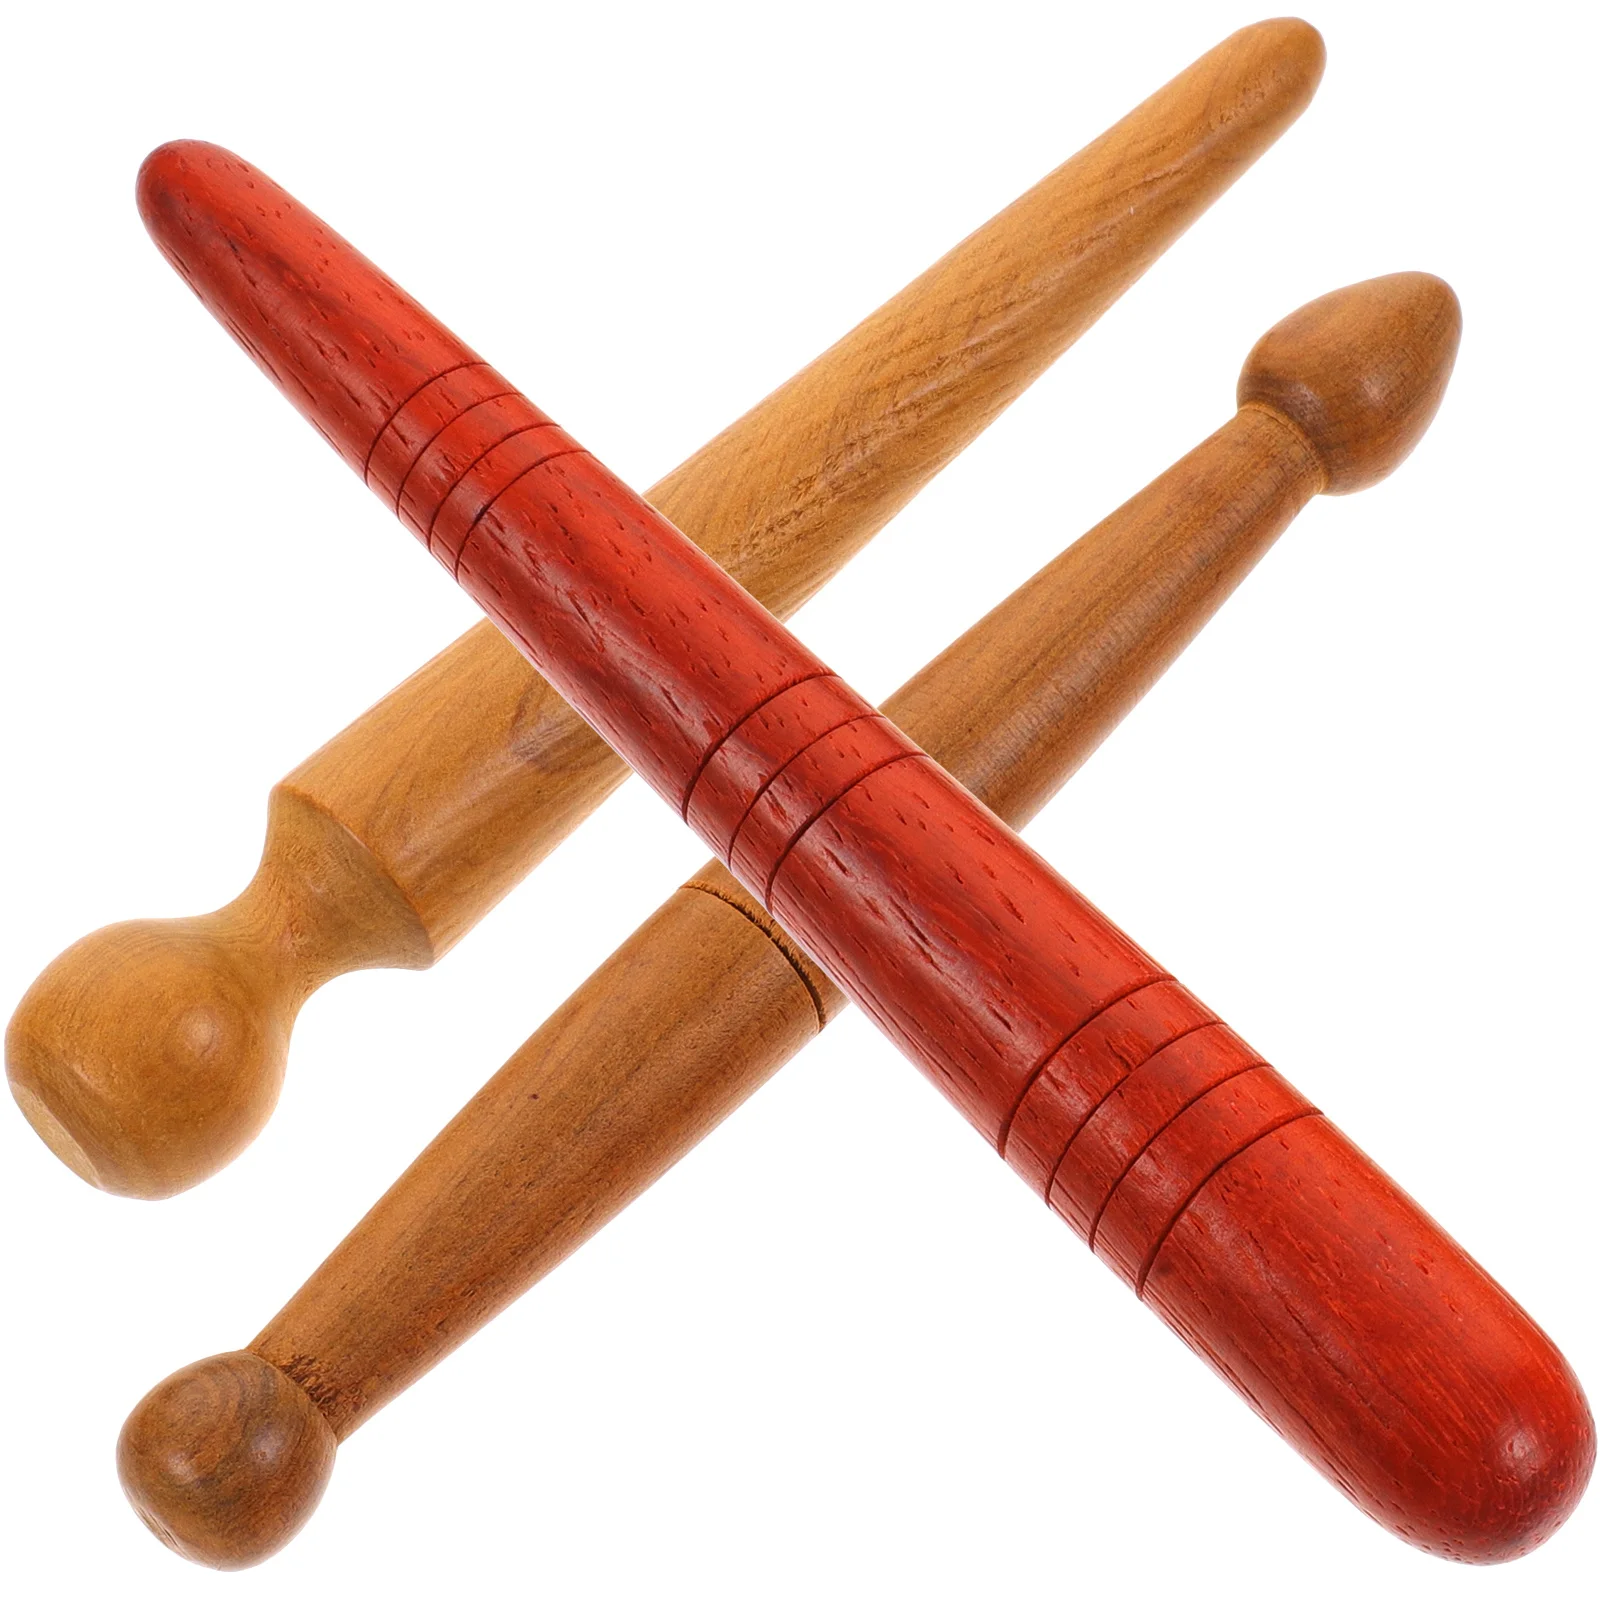 

3 Pcs Body Massager Wooden Acupuncture Stick Reflexology Tools Sole of Foot Feet Relax